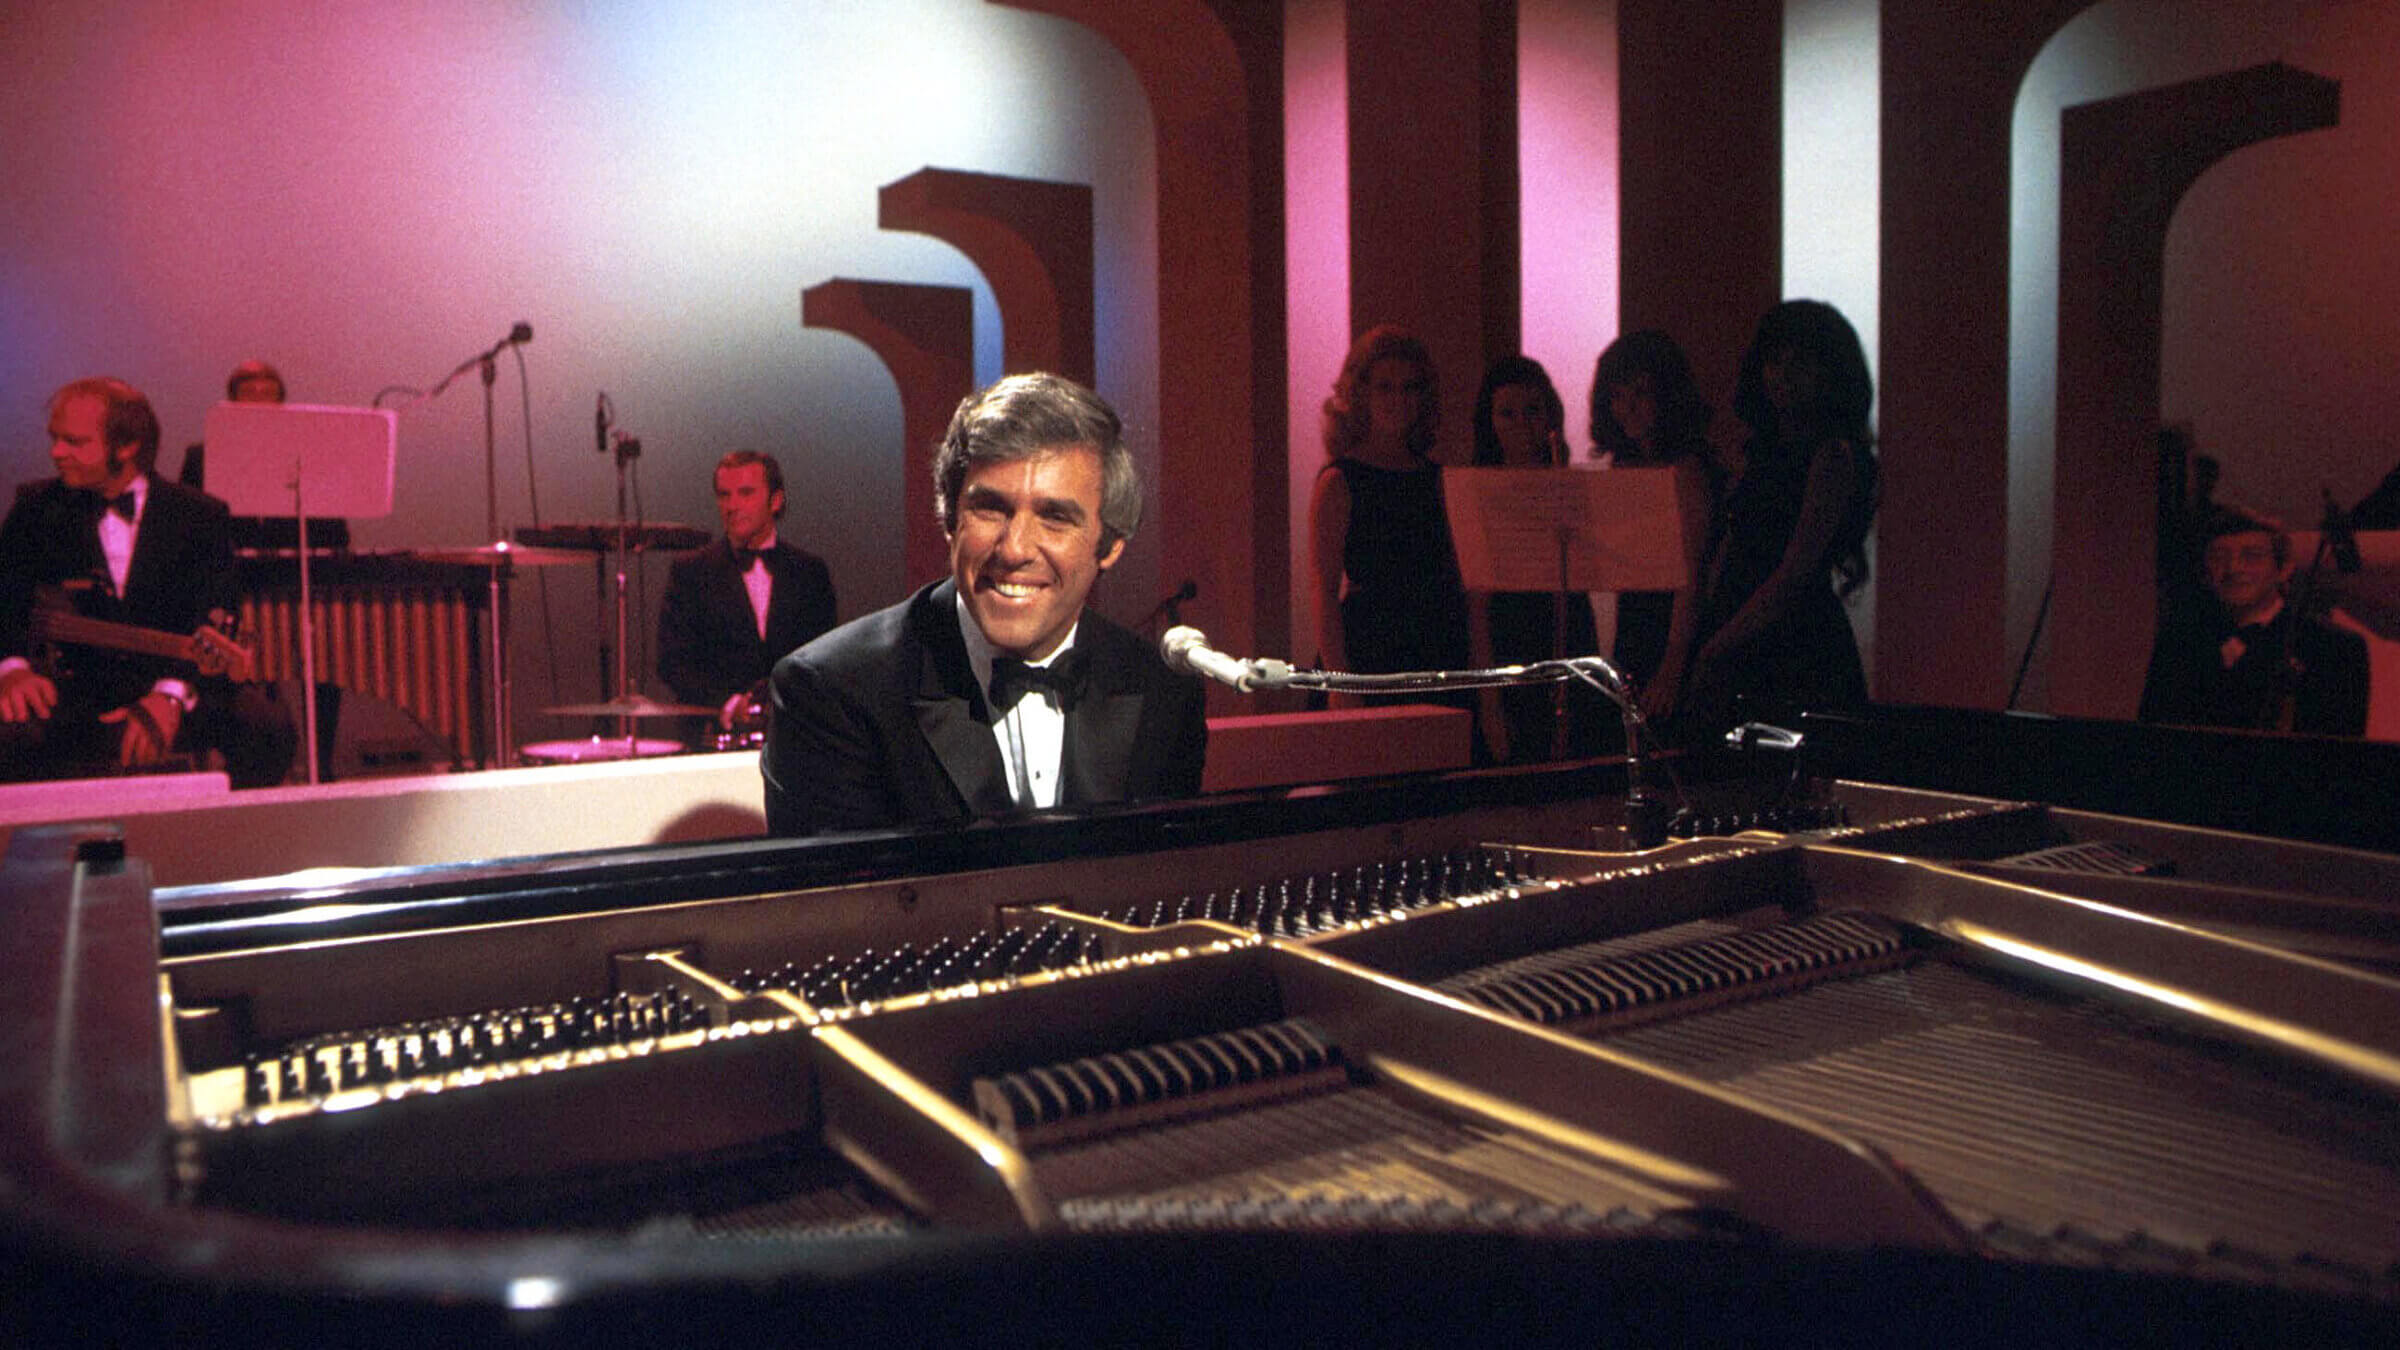 Burt Bacharach at the piano in 1968.